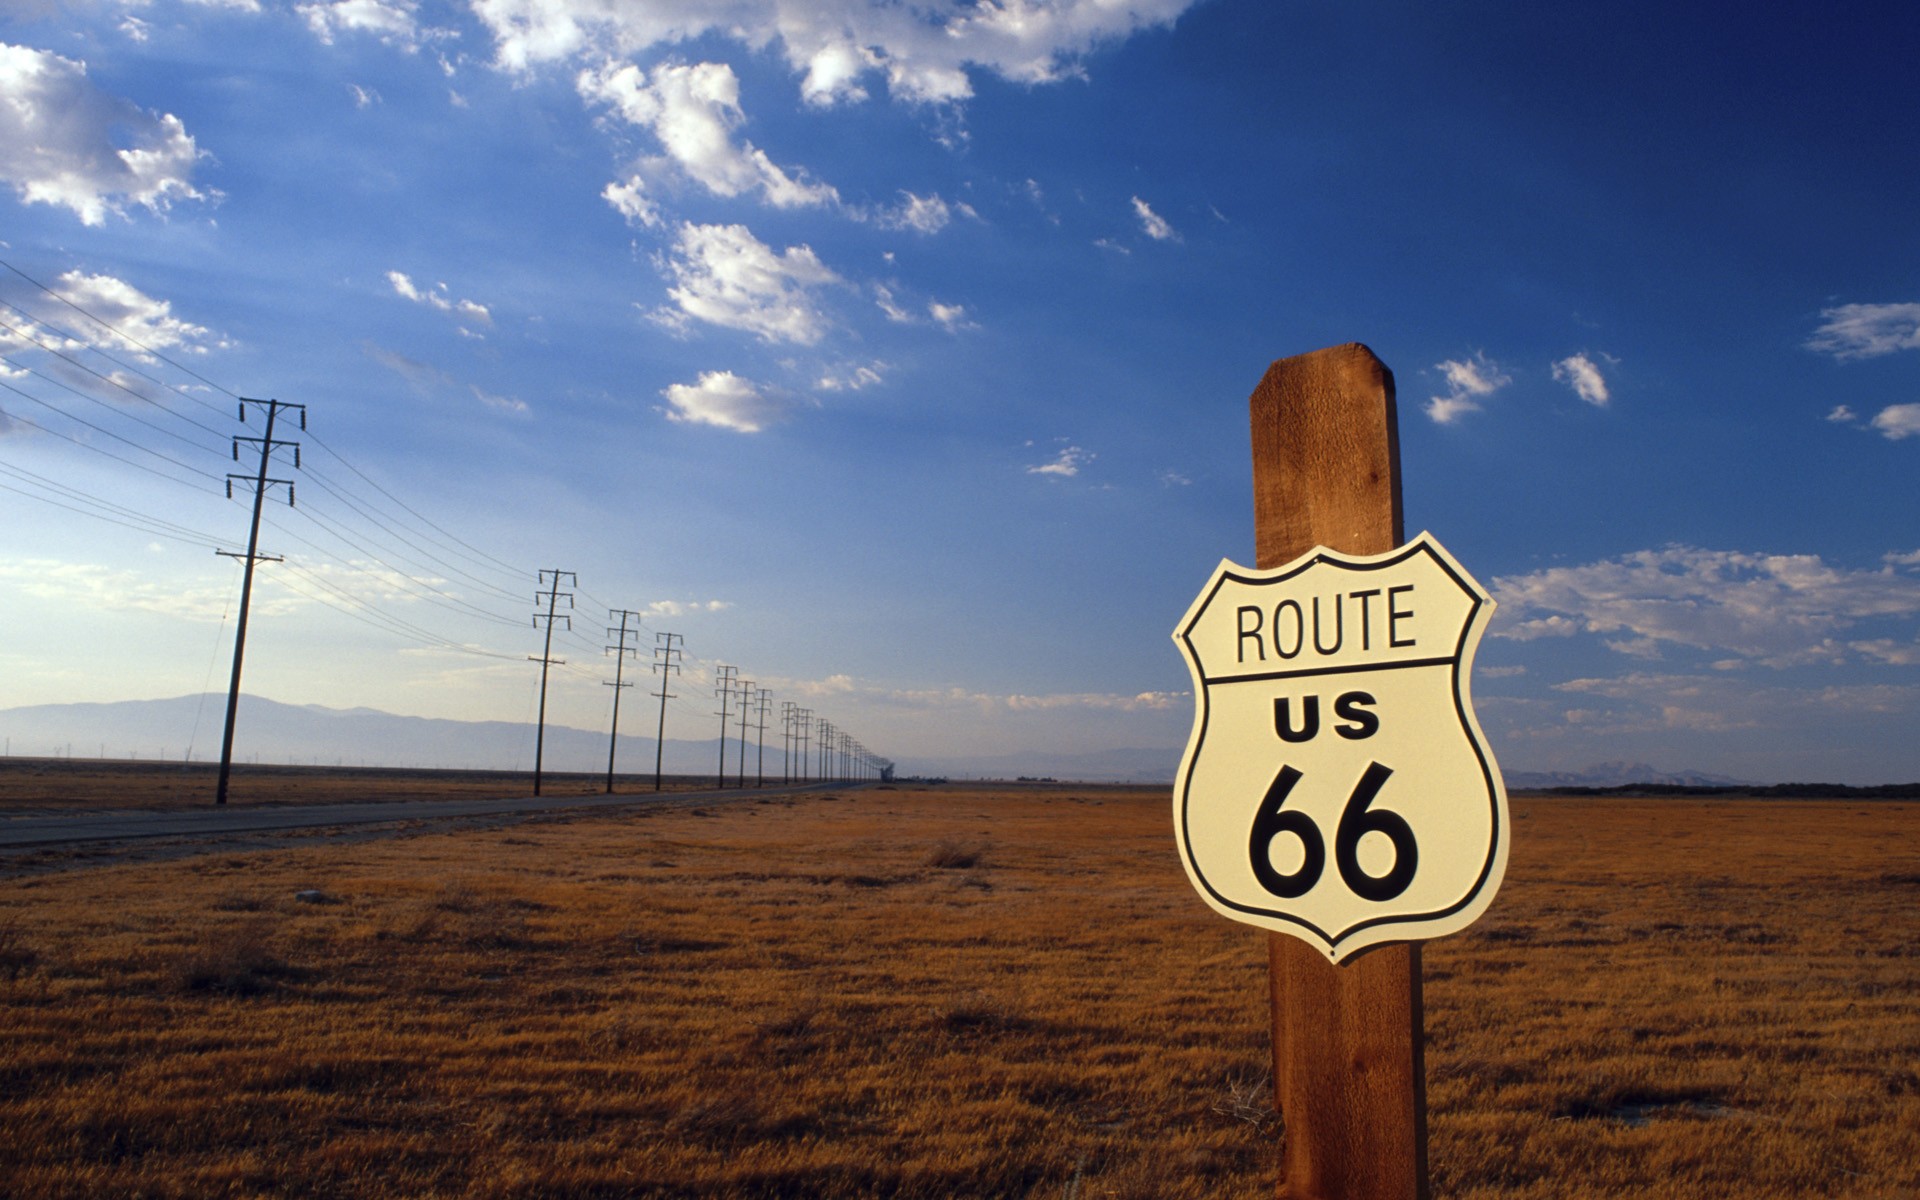 General 1920x1200 USA road Route 66 power lines field clouds utility pole sign landscape outdoors